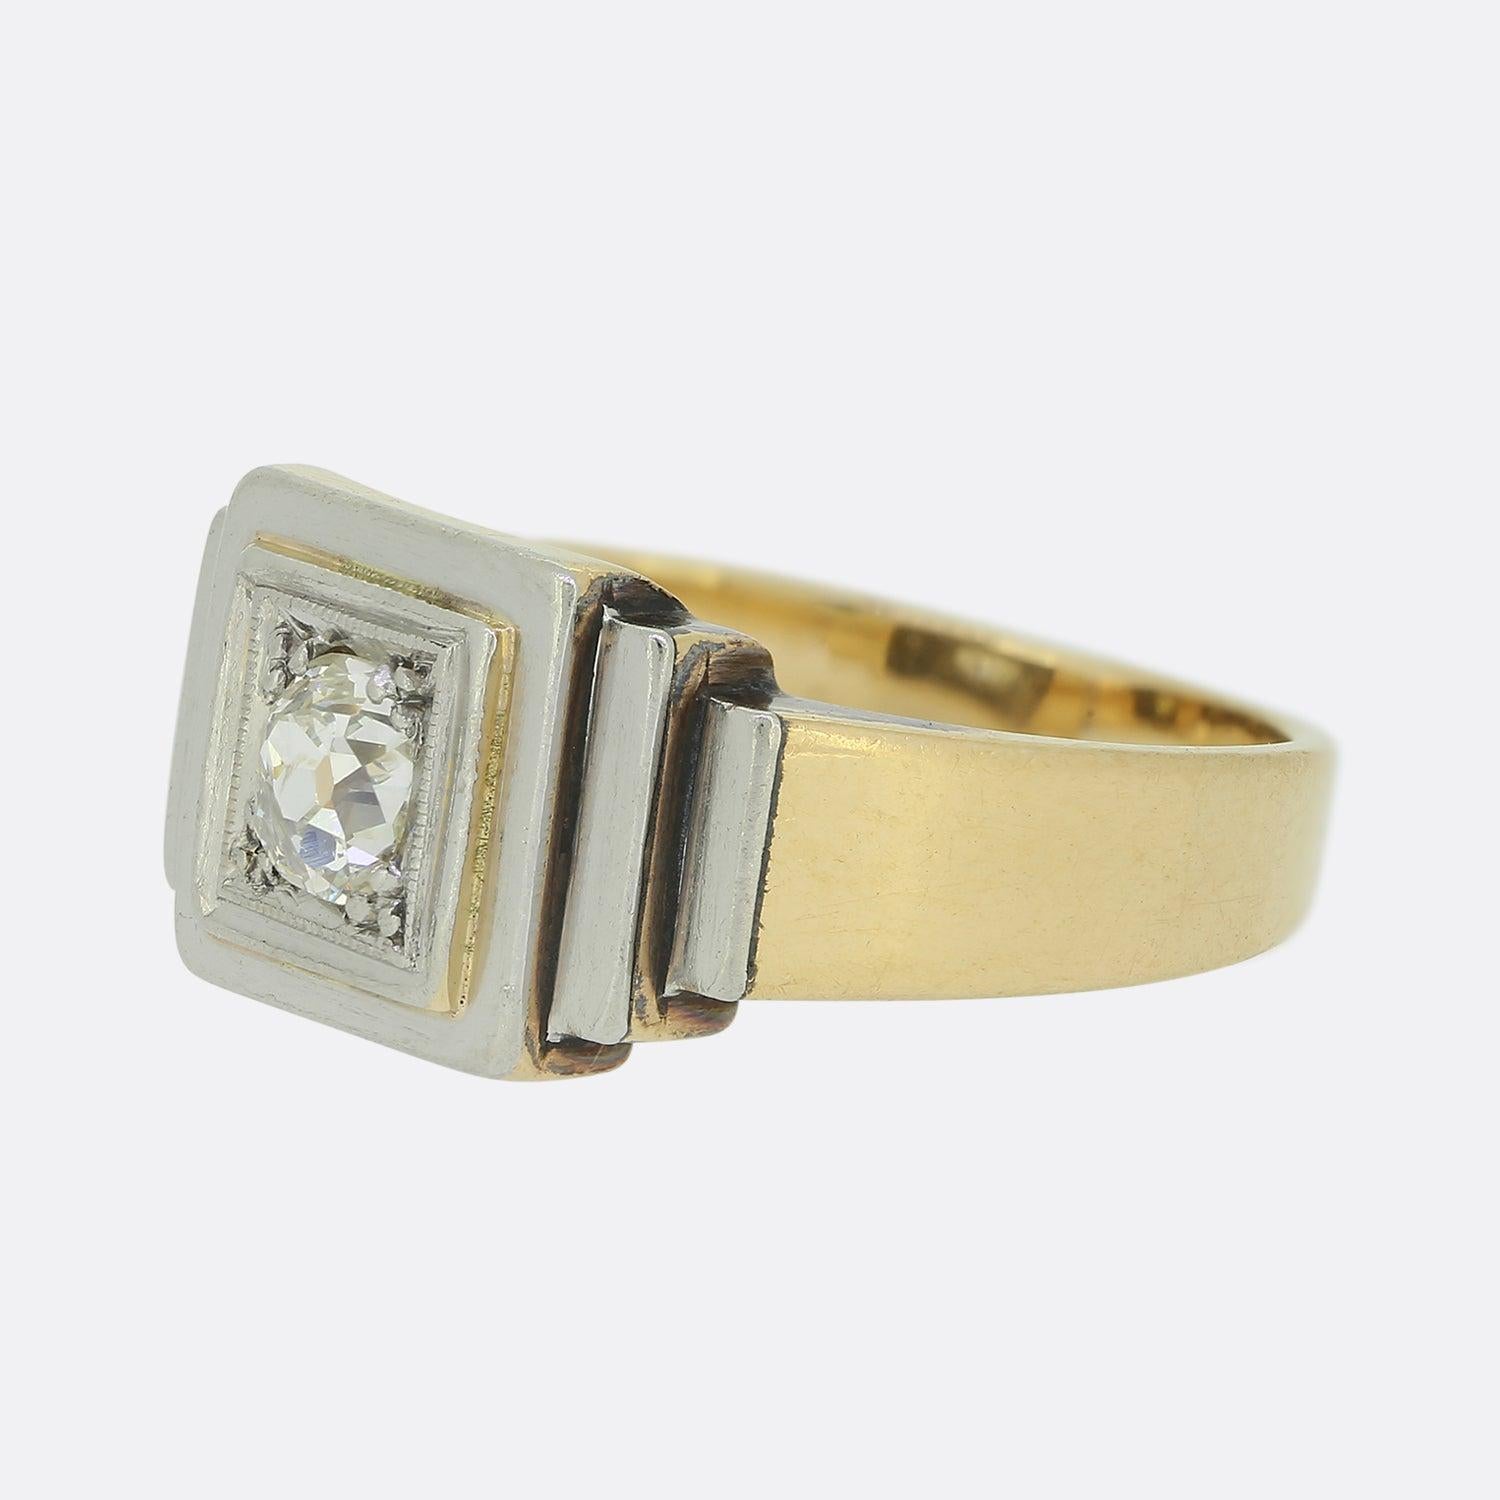 Here we have a sleek antique diamond gents ring. This piece takes on a square shaped face and showcases a single oval shaped old cut diamond within a fine white gold milgrain detailing. However, this piece gains its true character via its stepped